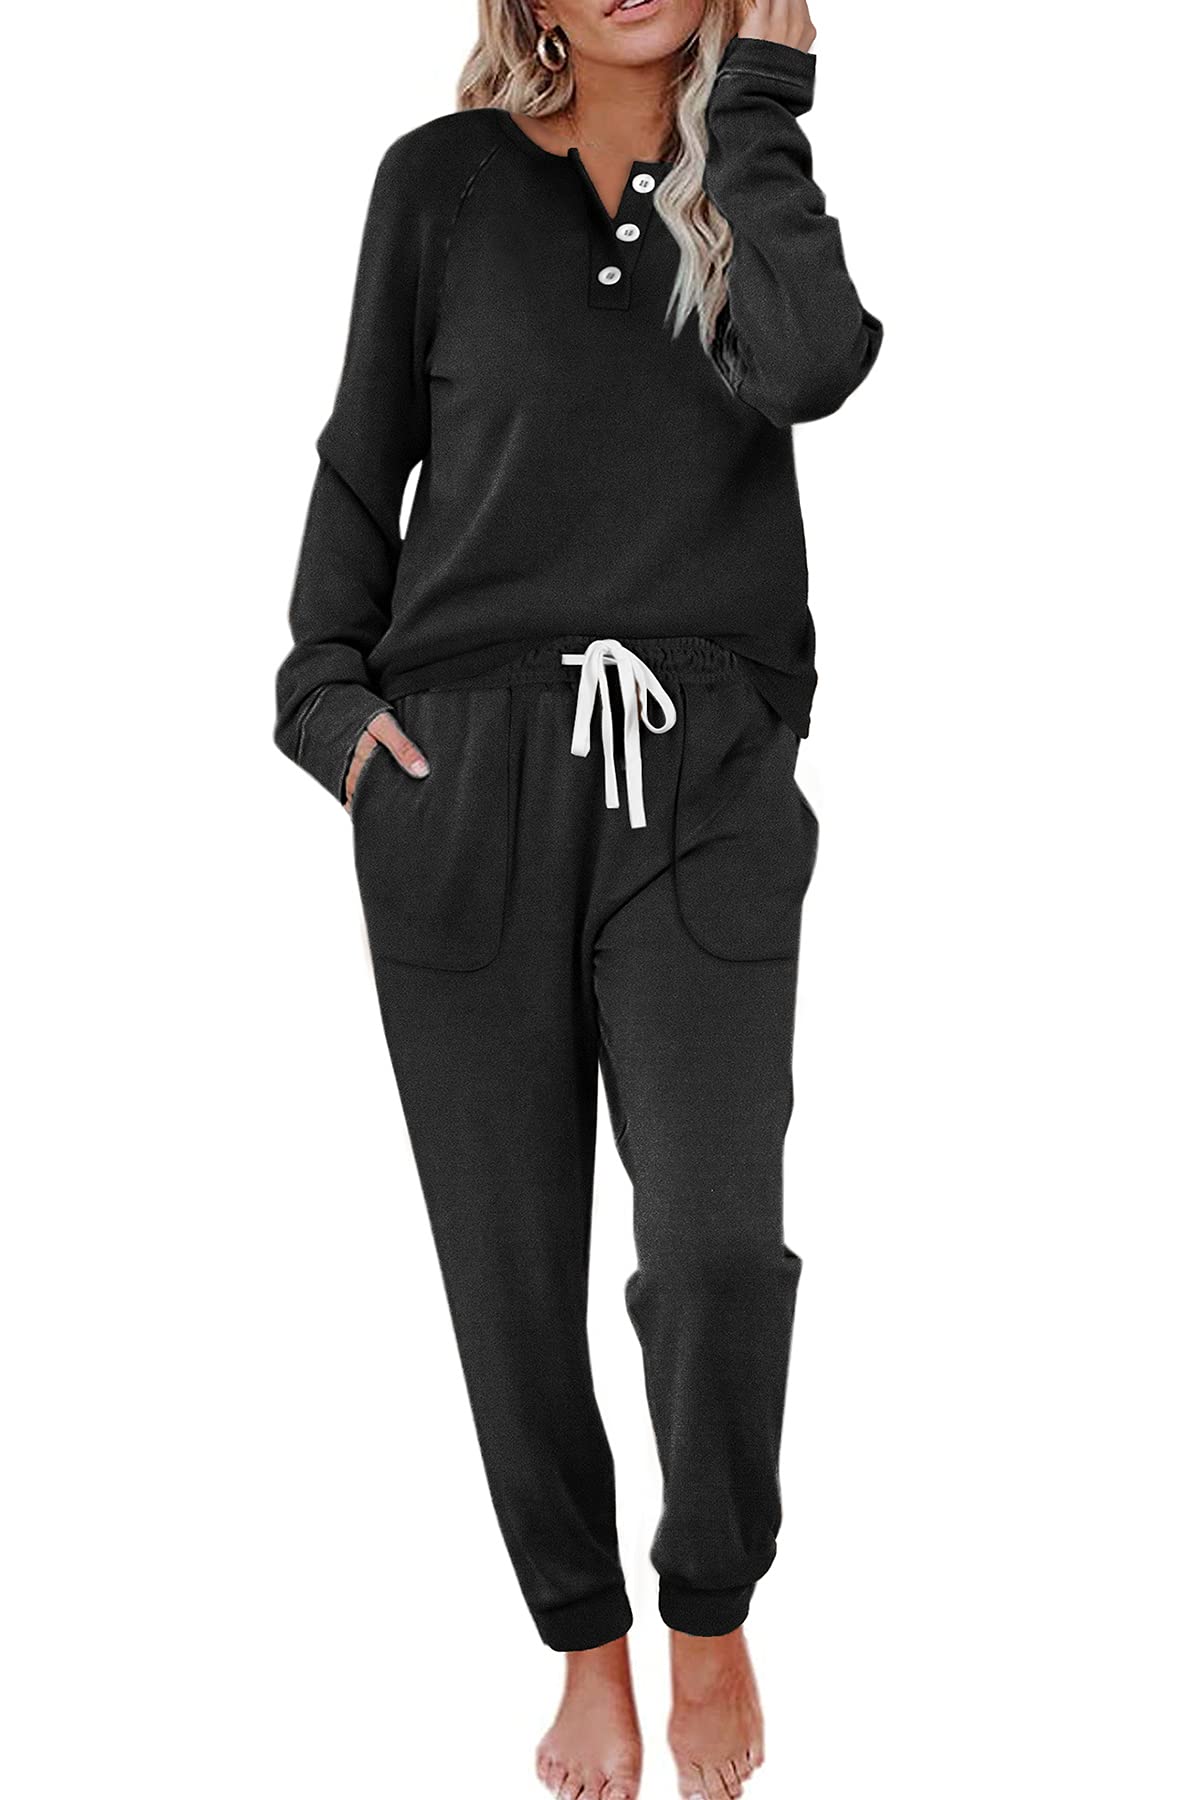 Two Piece Outfits For Women Jogging Suits Long Sleeve Sweatsuit Casual  Jogger Tracksuit Pants Sets Dark Gray White Navy Blue XL